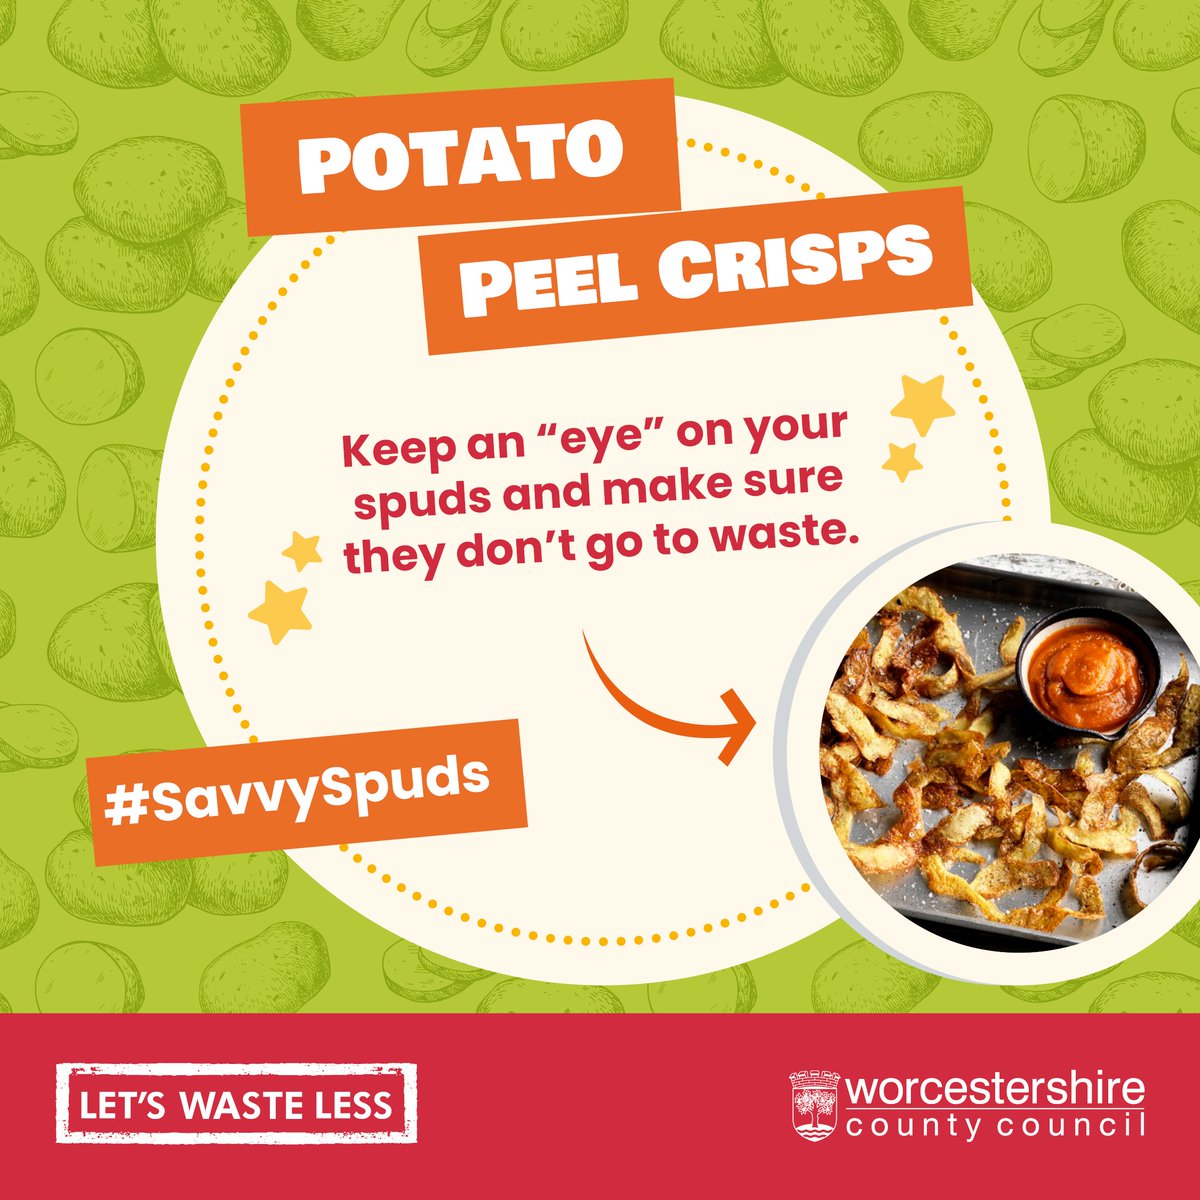 Got your 👀 on those potatoes? Don't toss them just yet! Pick the eyes out and they're good to go. Check out bit.ly/3N7Sa6o for tasty recipes. 🥔 Even the skins can be turned into crispy treats! #SavvySpuds #FoodSavvyWorcestershire #letswasteless #NoFoodWaste 🌱🥔